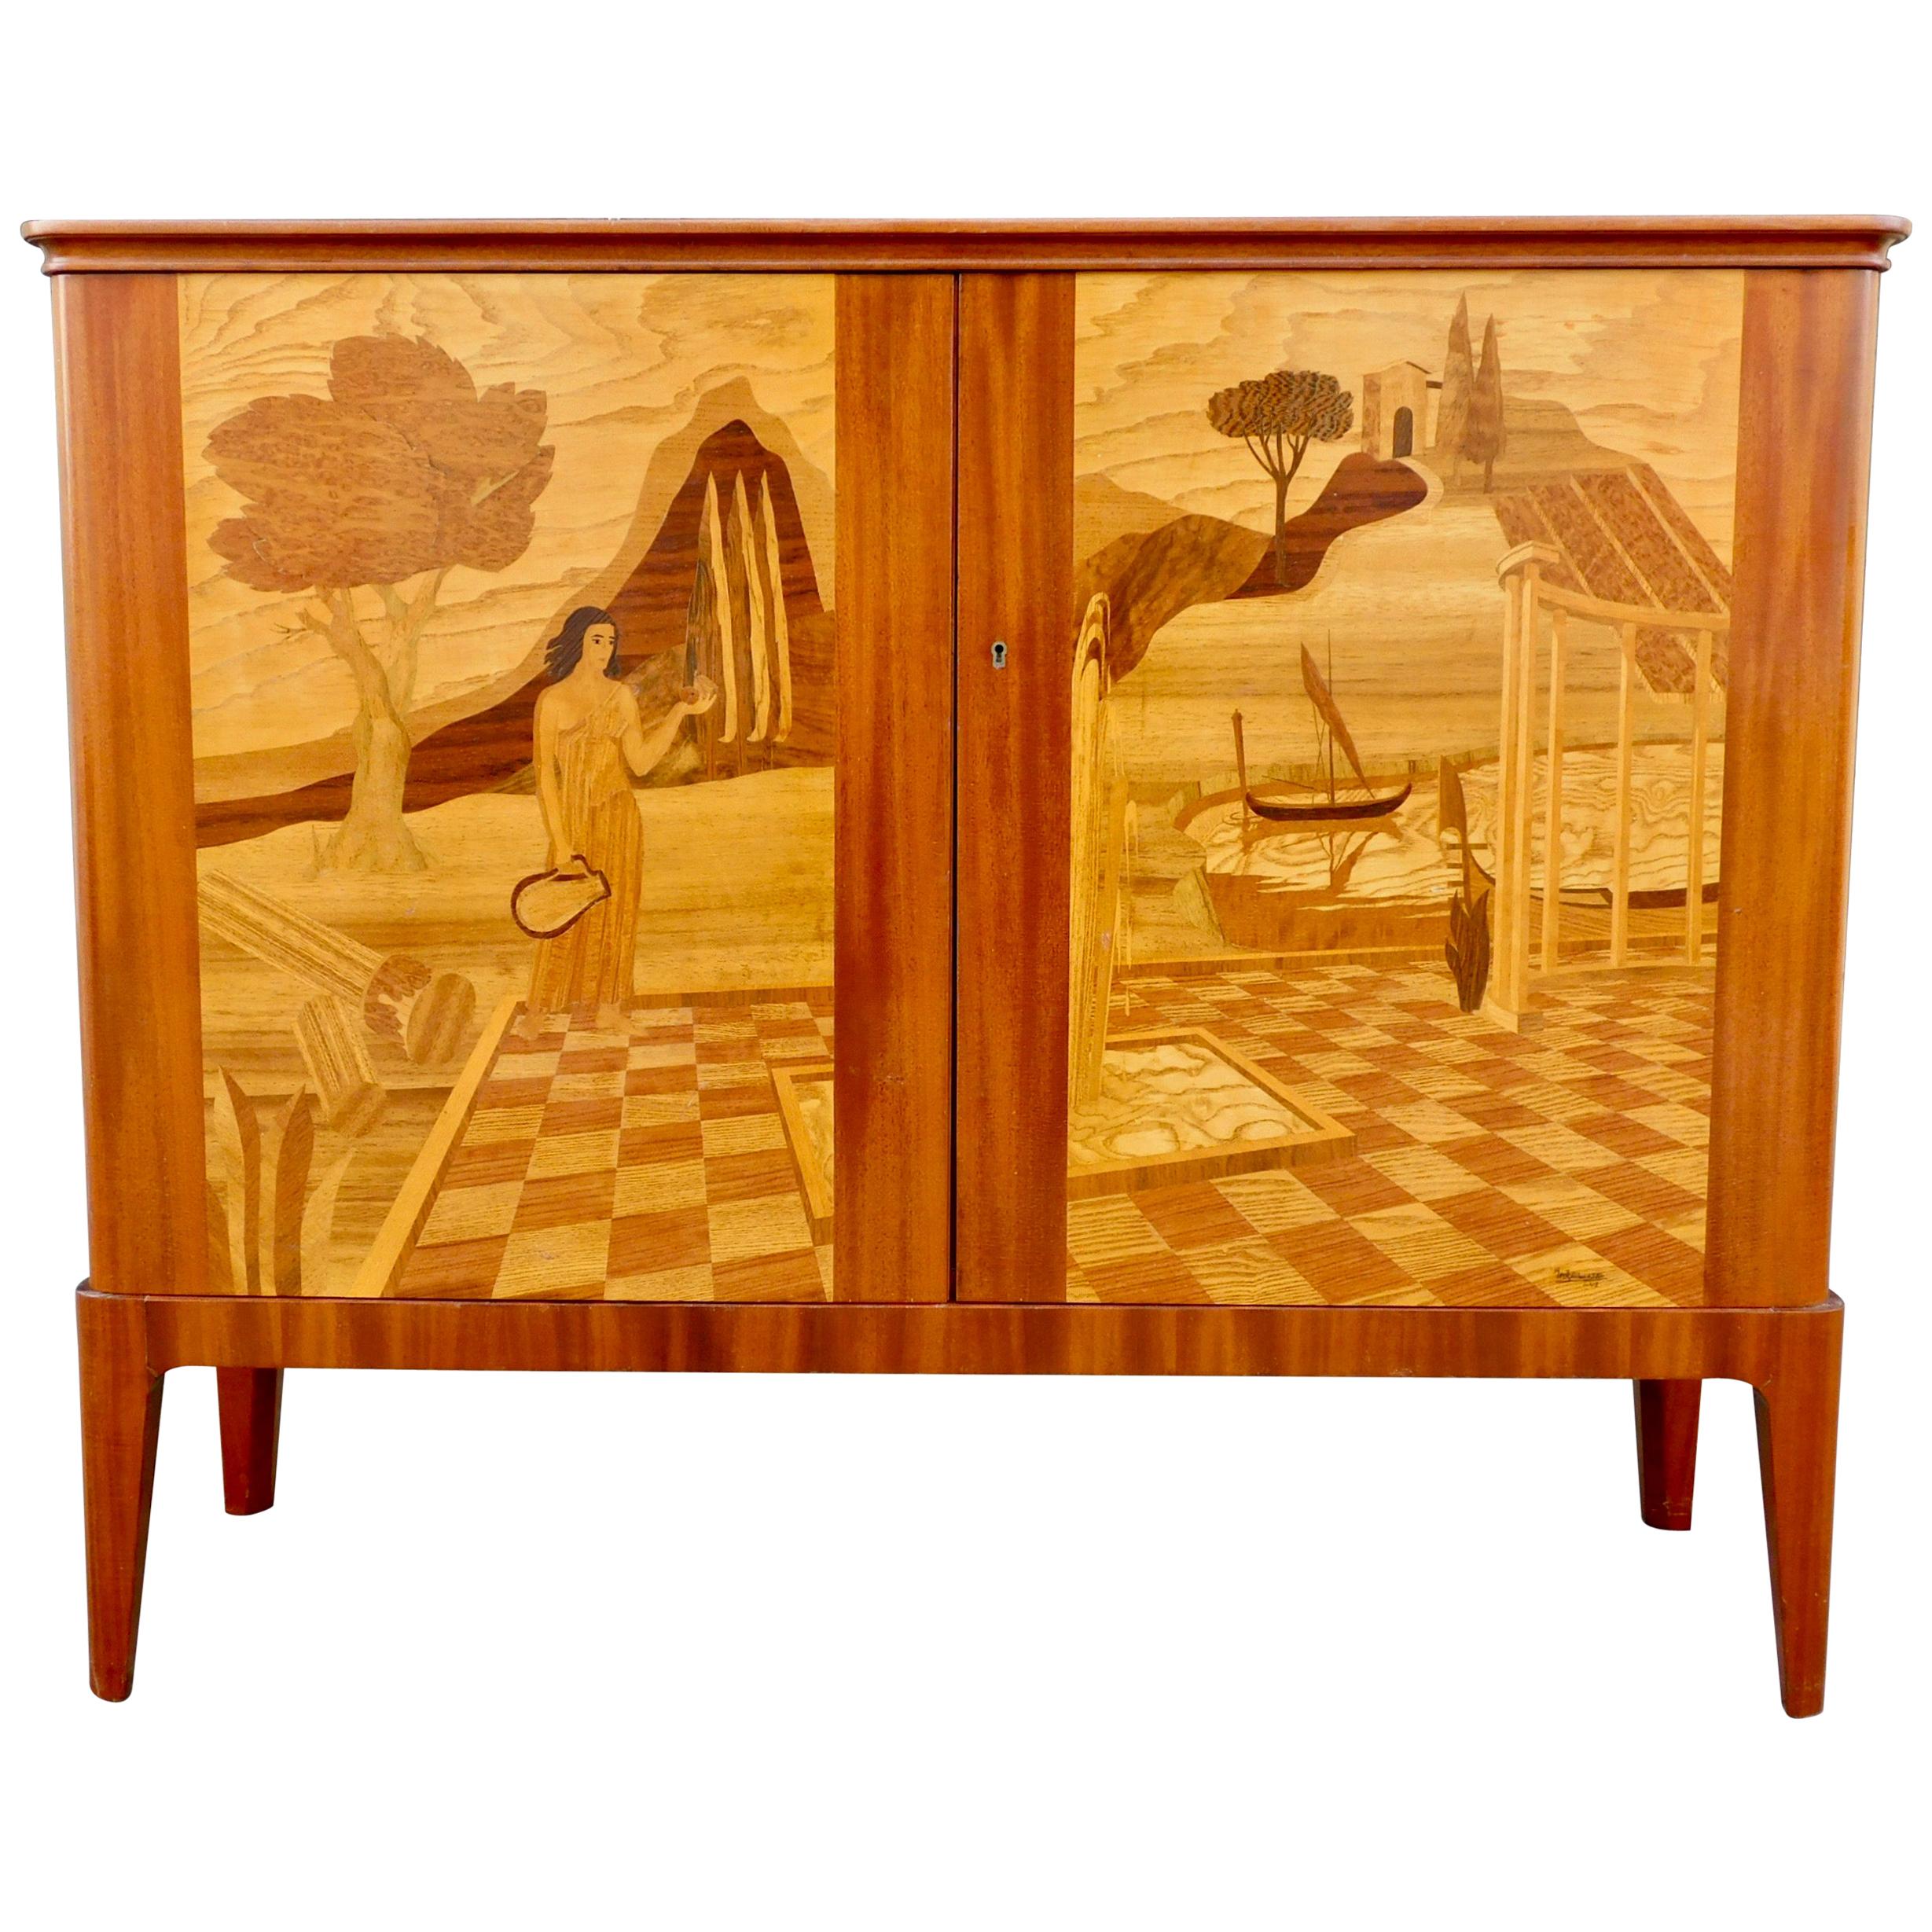 Swedish Inlaid Storage Cabinet by Erik Matsson for Mjölby Intarsia, 1943 For Sale